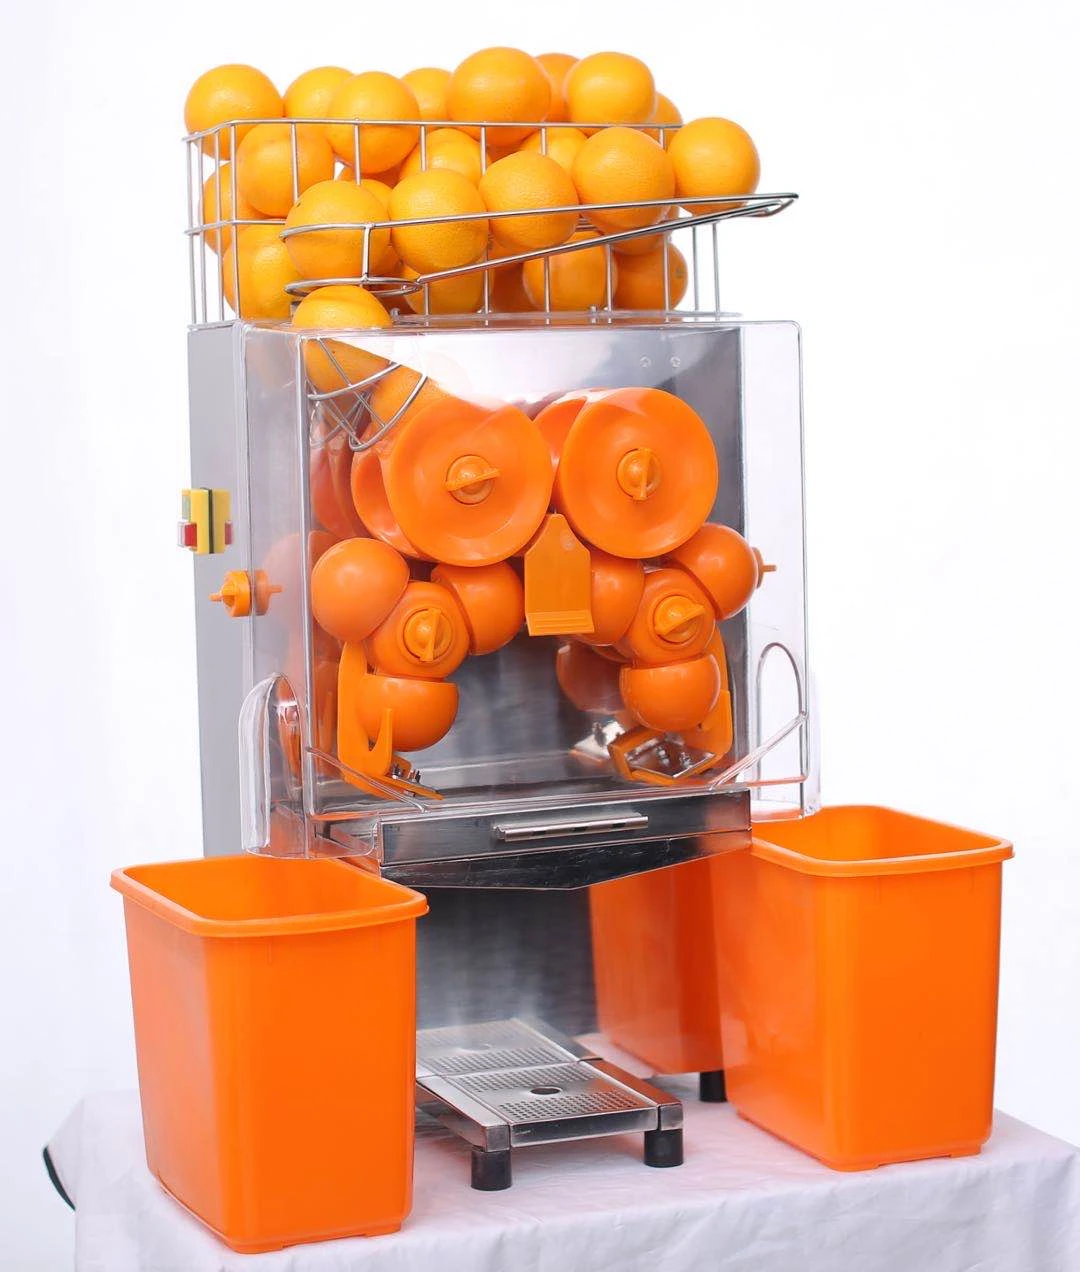 2020 New Design Hot Sell Stainless steel Industrial Electric Automatic Commercial Orange Juicer Machine Price